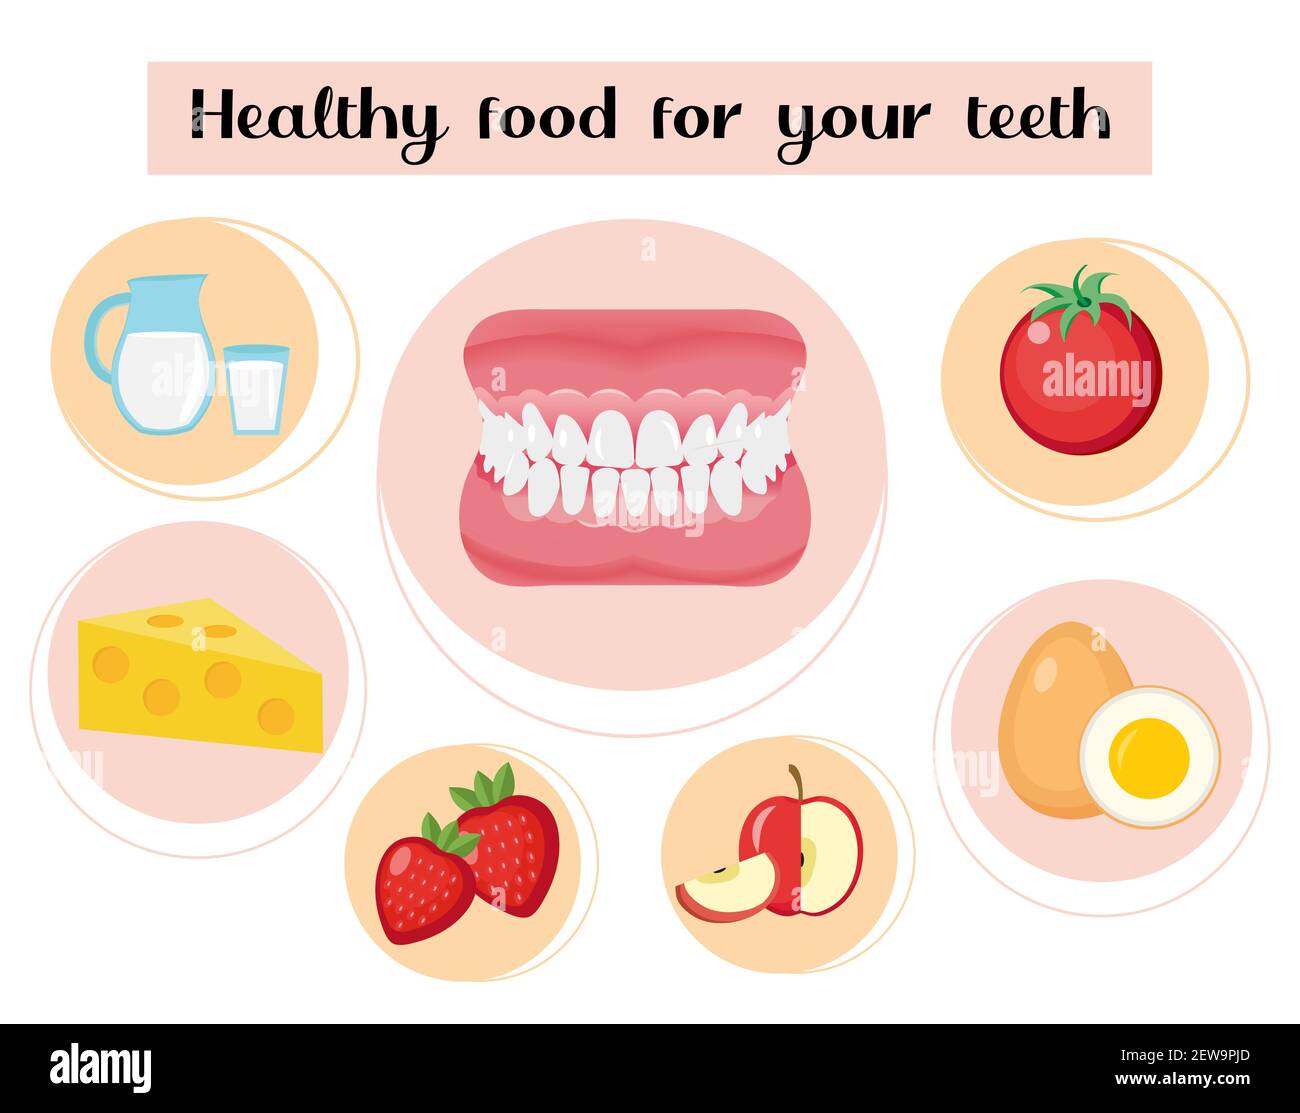 Healthy food for your teeth. Concept of food and vitamins, medicine, prevention of digestive system diseases. Vector illustration. Stock Vector